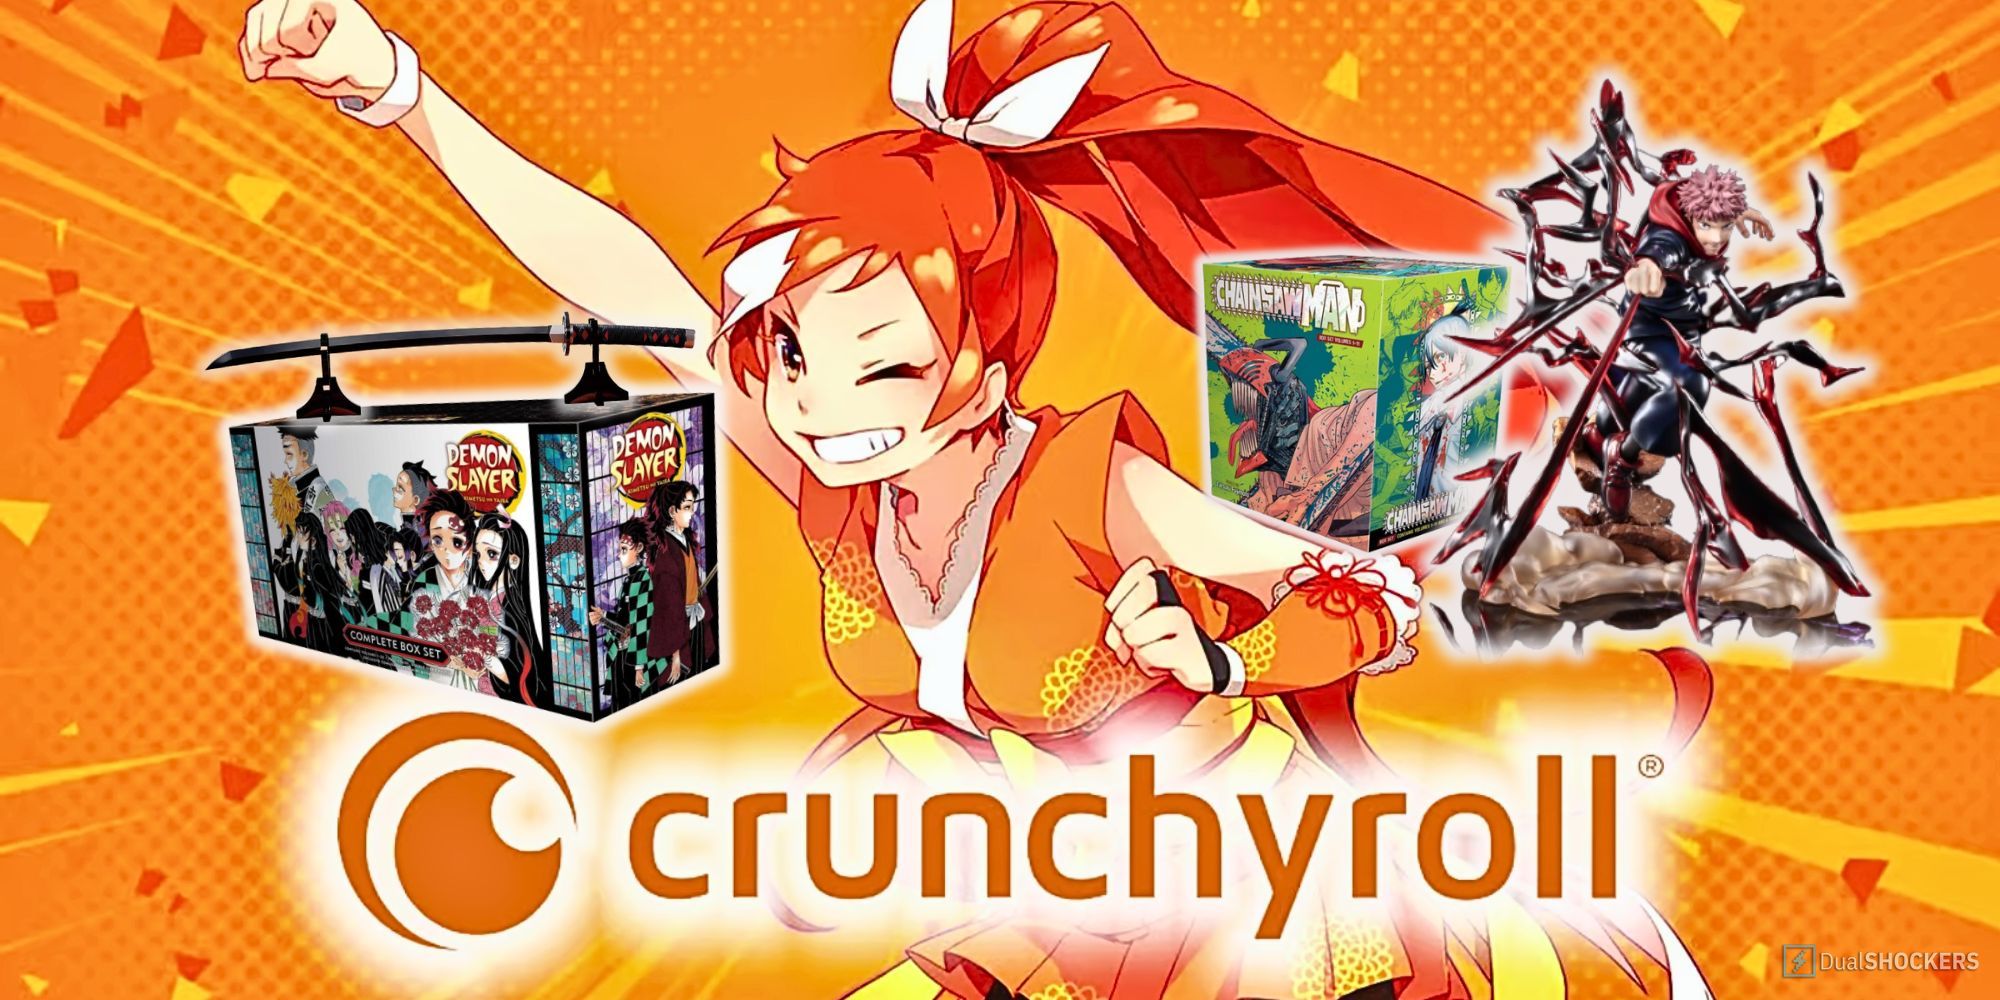 Image with the red-haired Crunchyroll mascot holding her fist in the air surrounded by anime products with the Crunchyroll logo